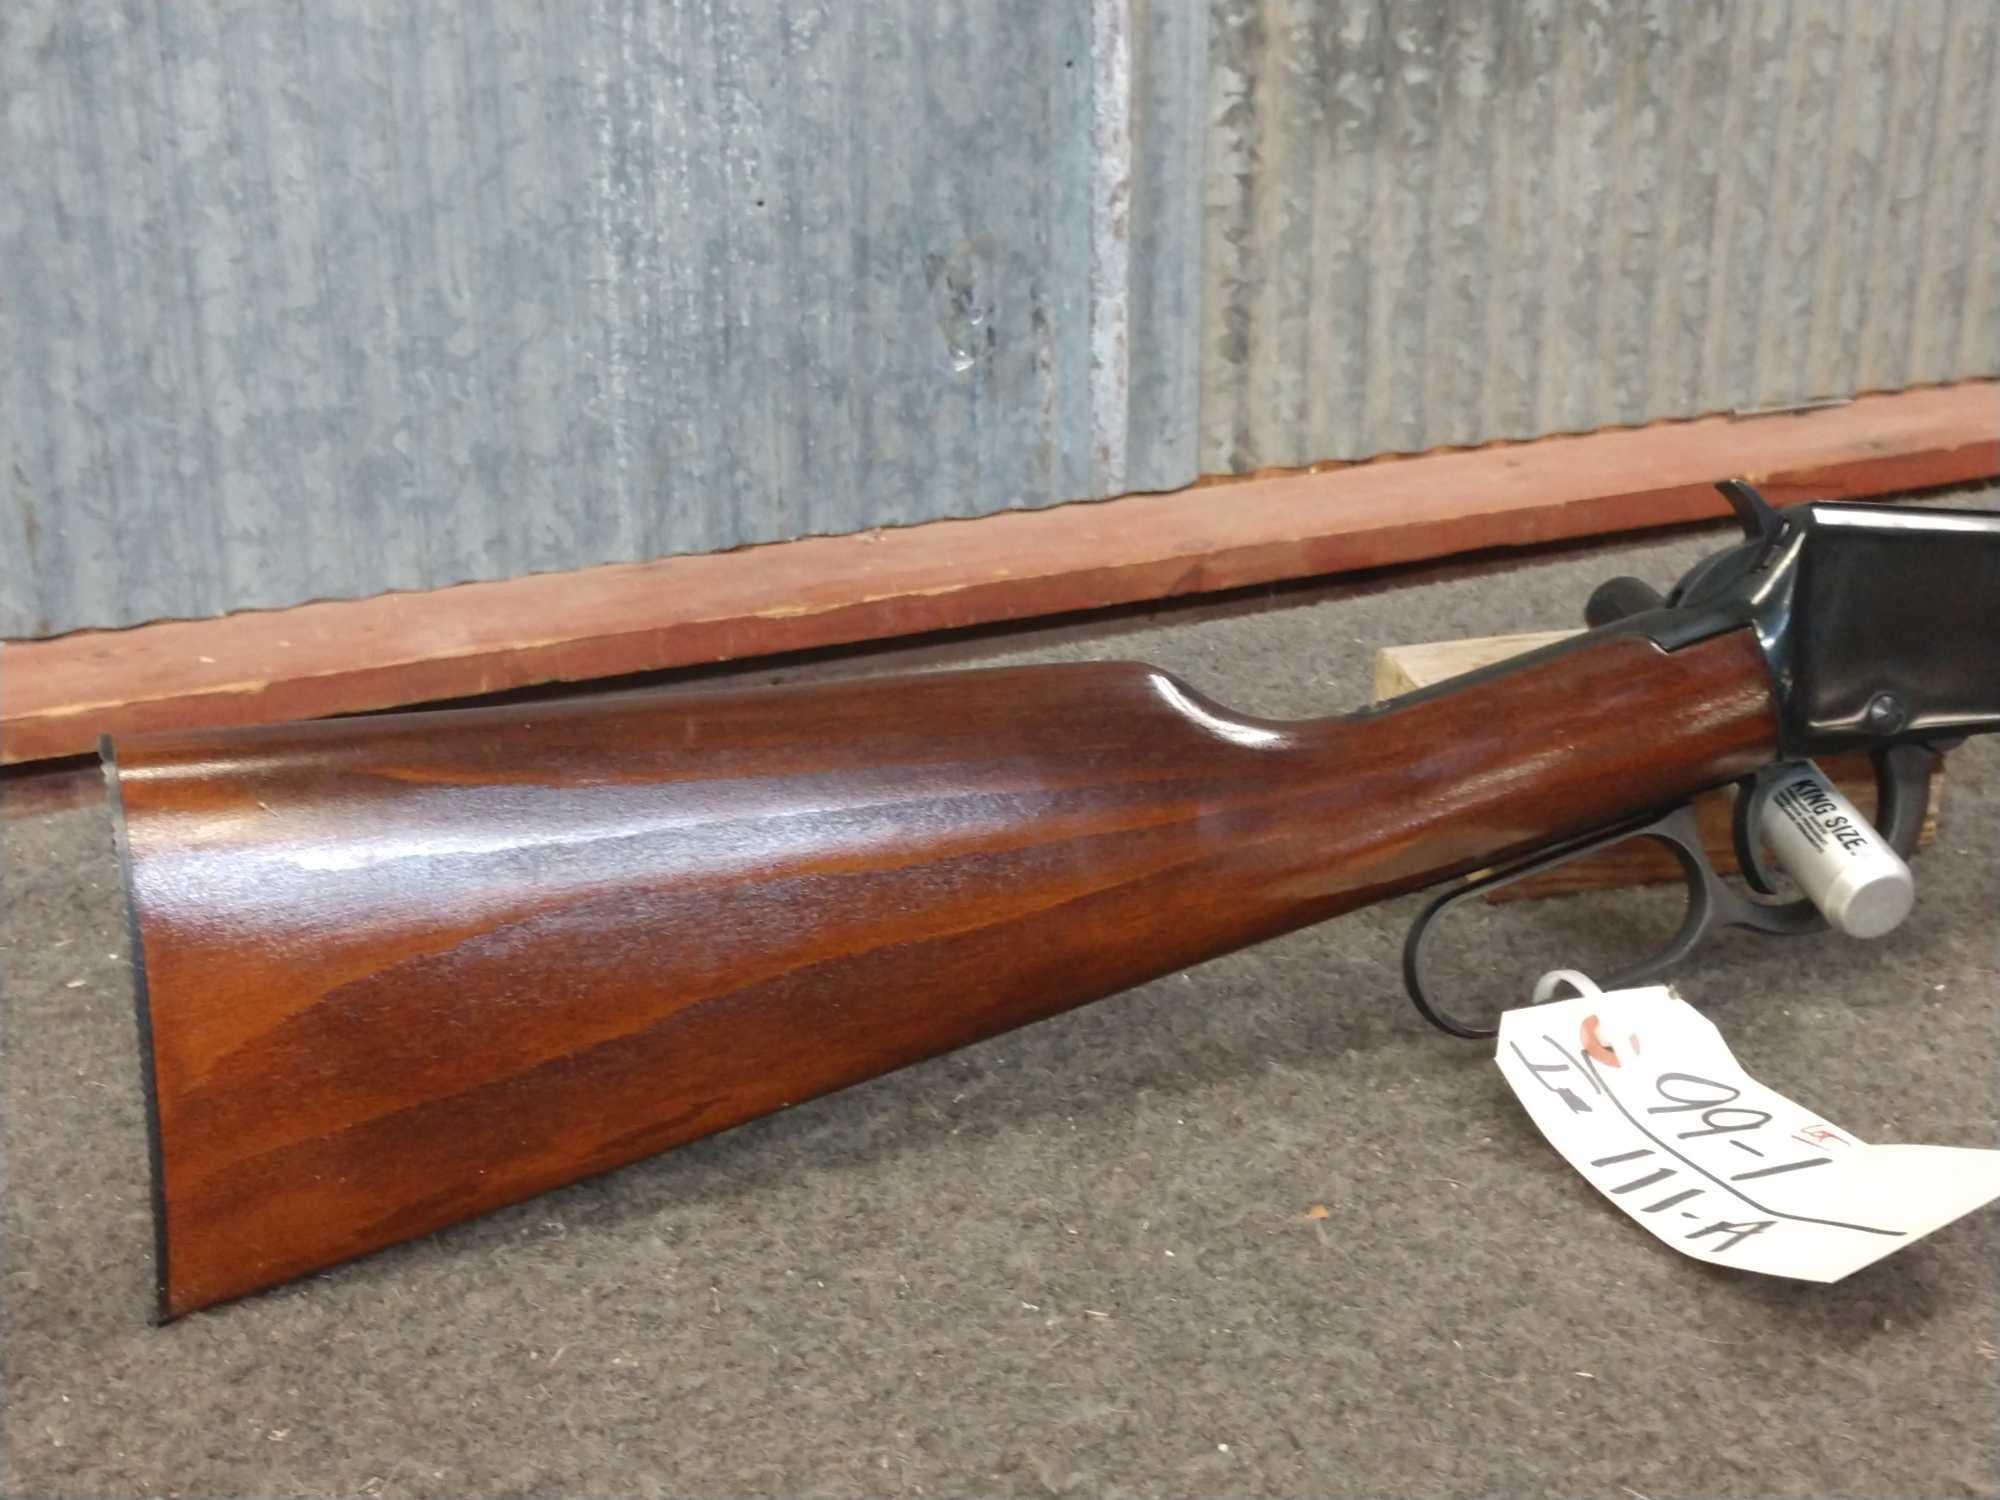 Iver Johnson Lever Action .22